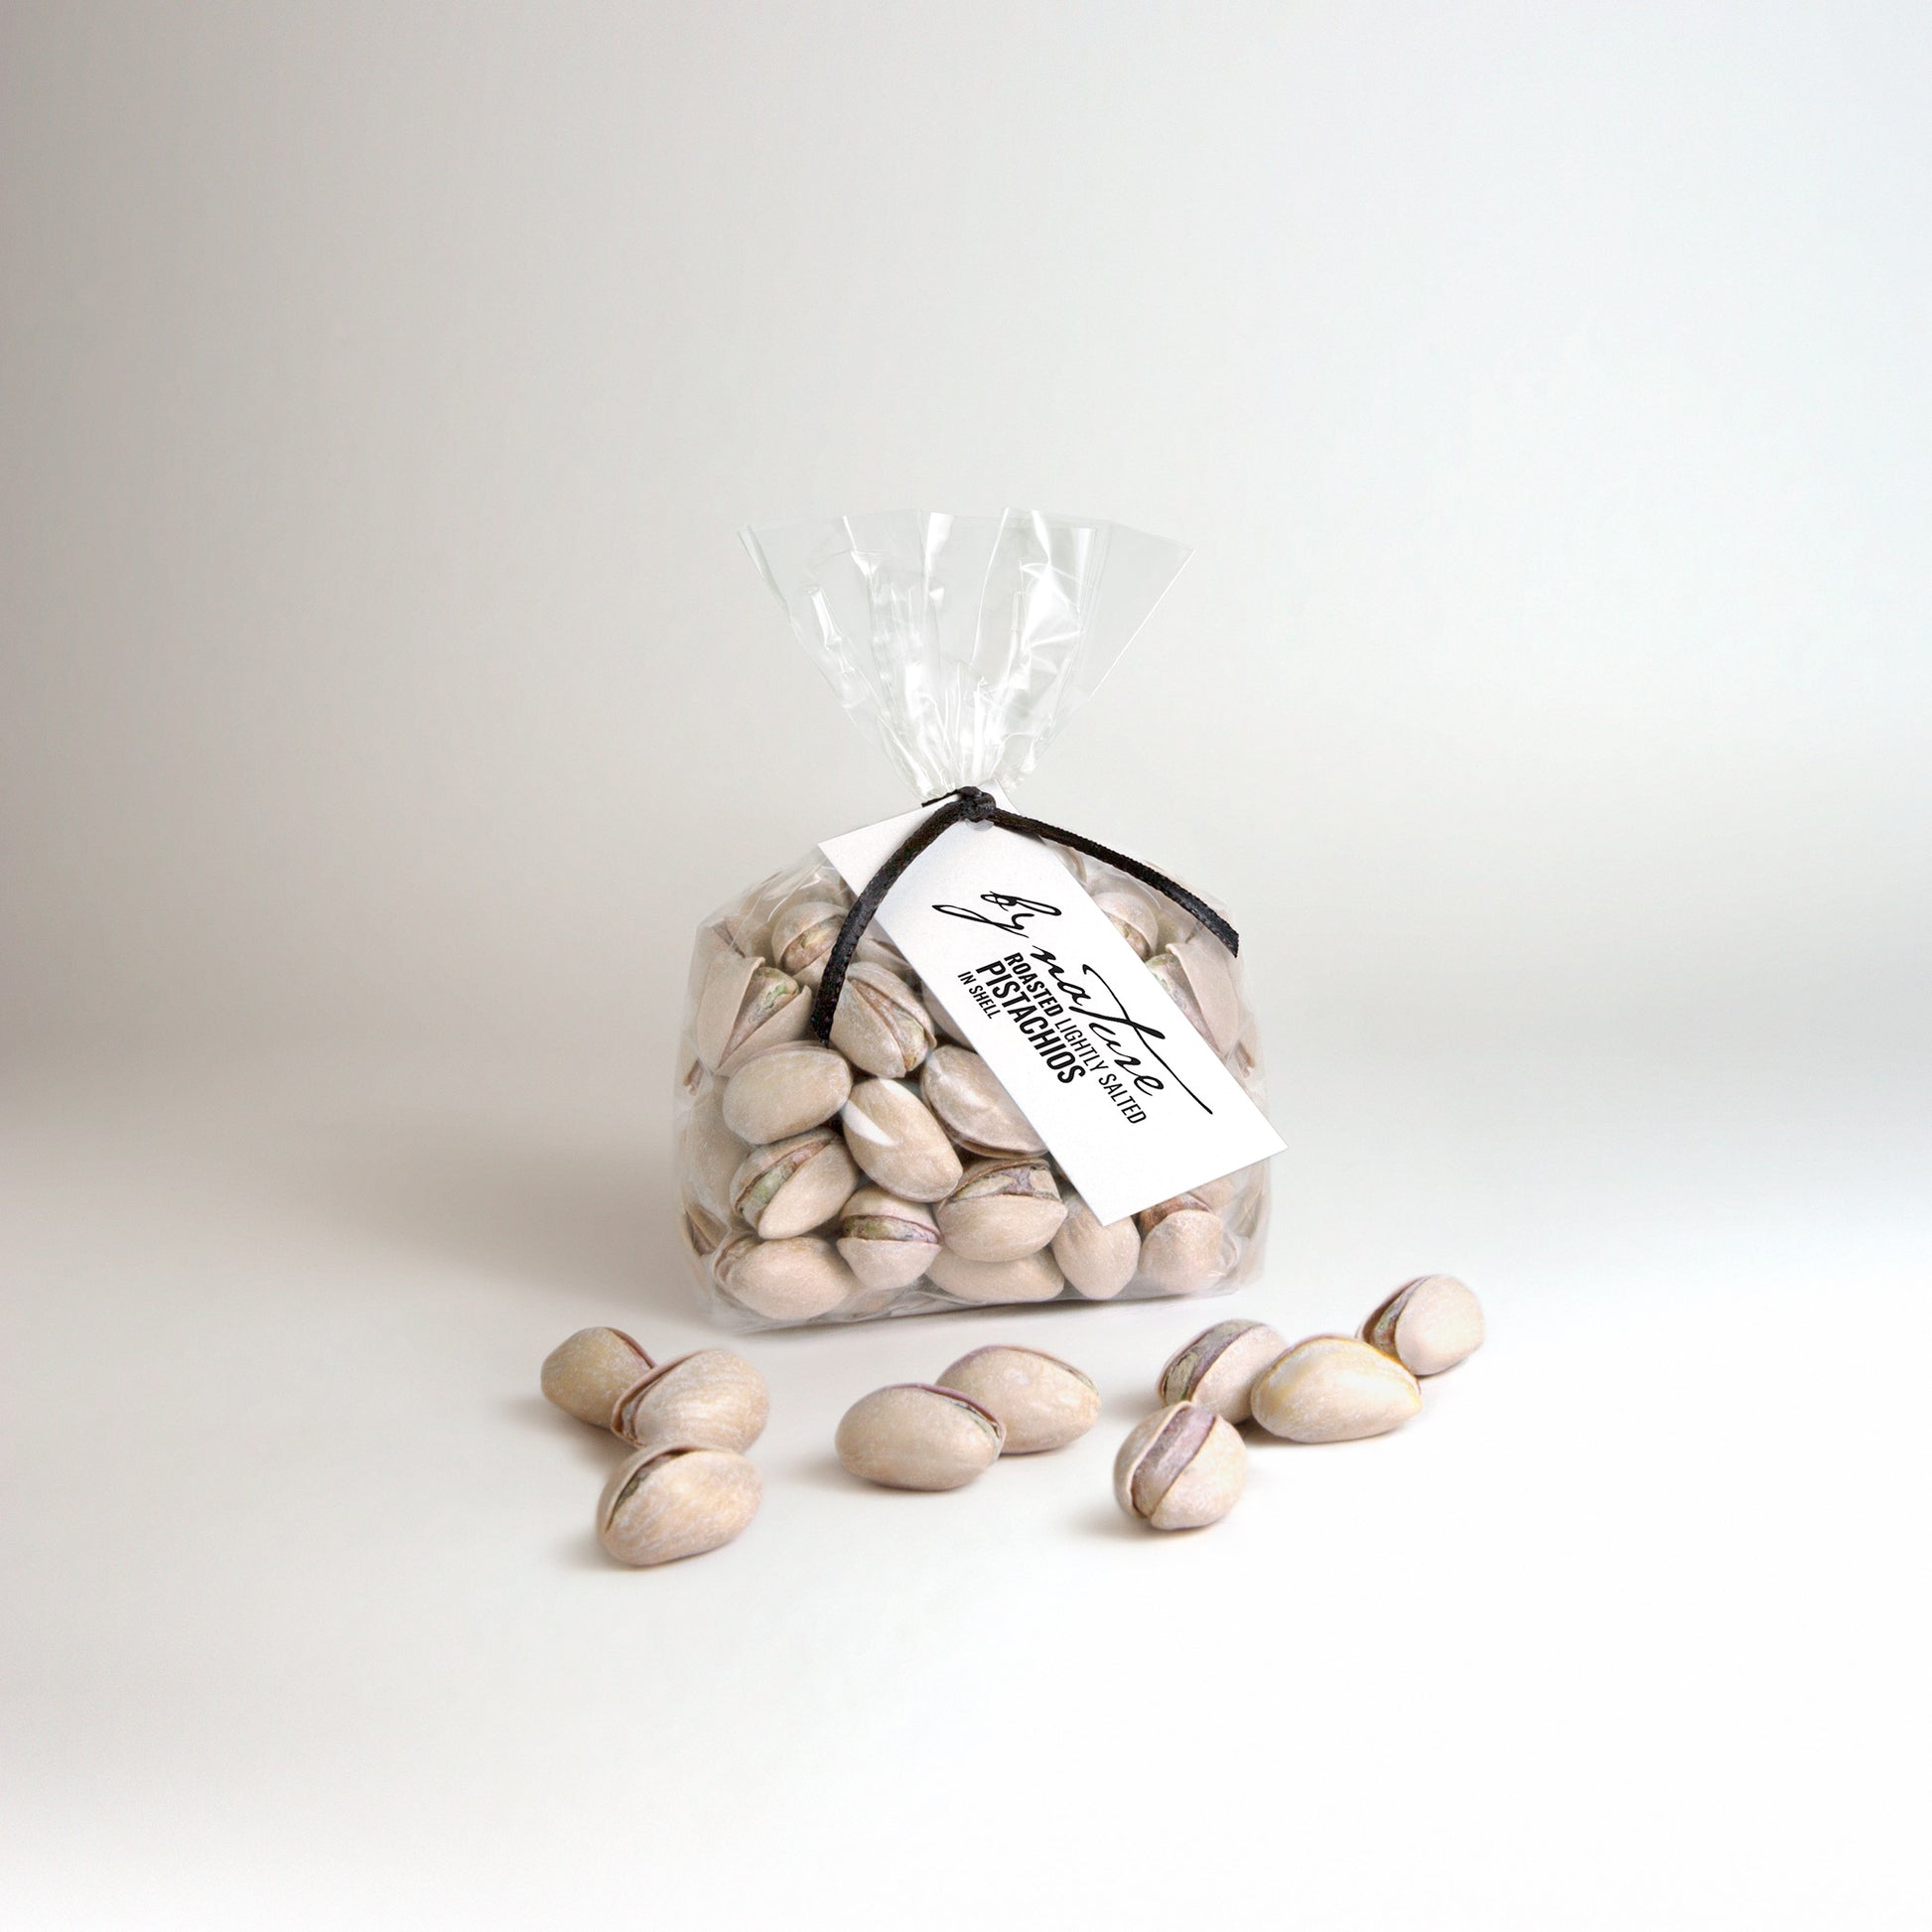 BY NATURE Pistachios in Shell, 100g - roasted, lightly salted.